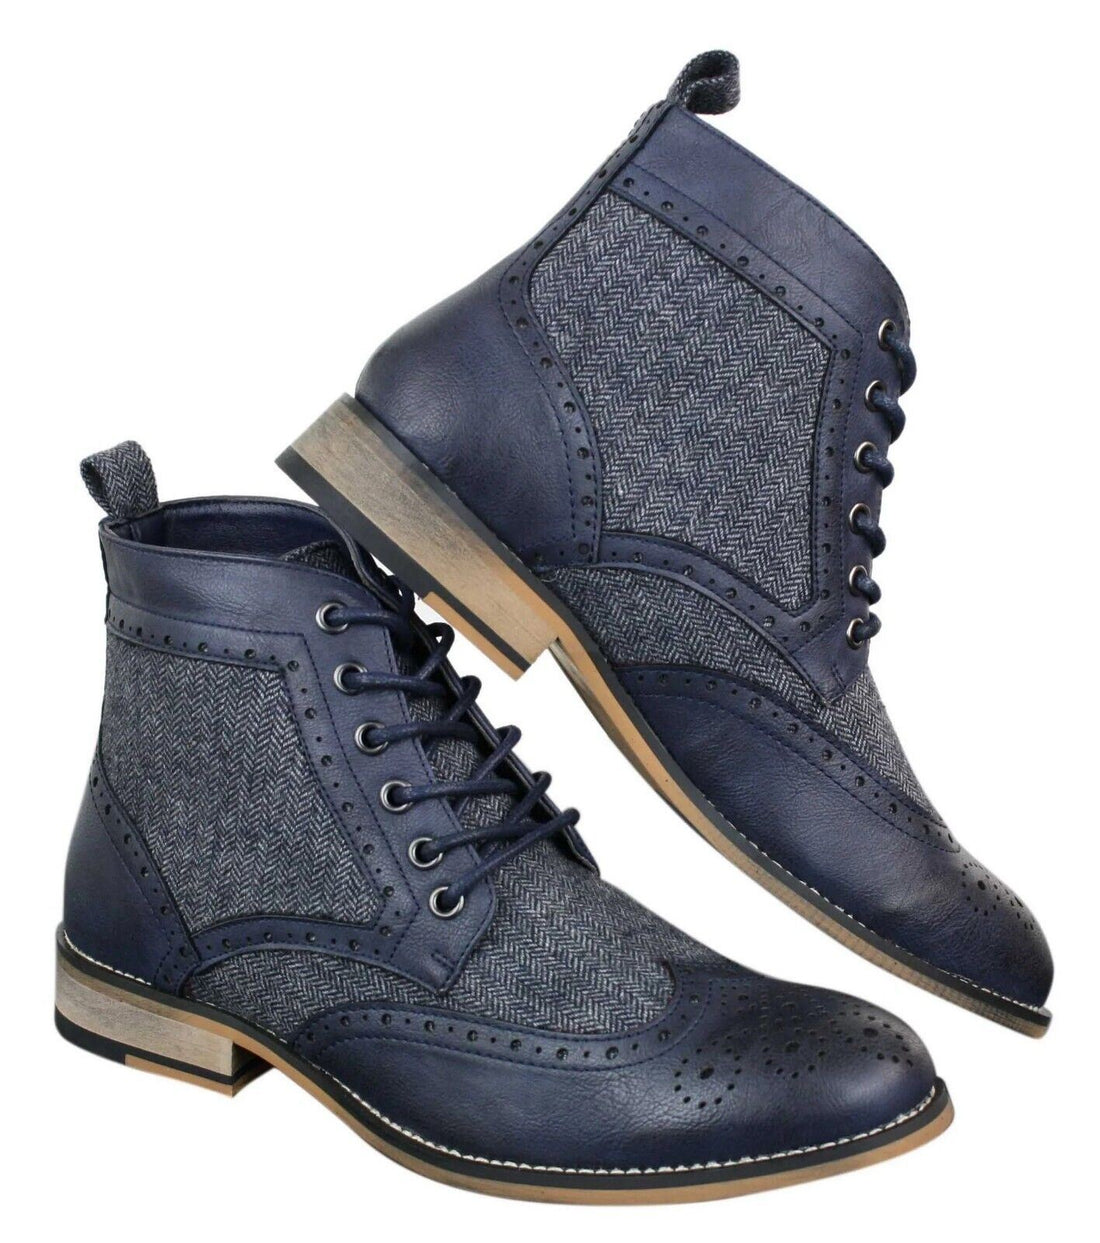 Mens Classic Tweed Oxford Ankle Boots in Navy Leather - Upperclass Fashions 